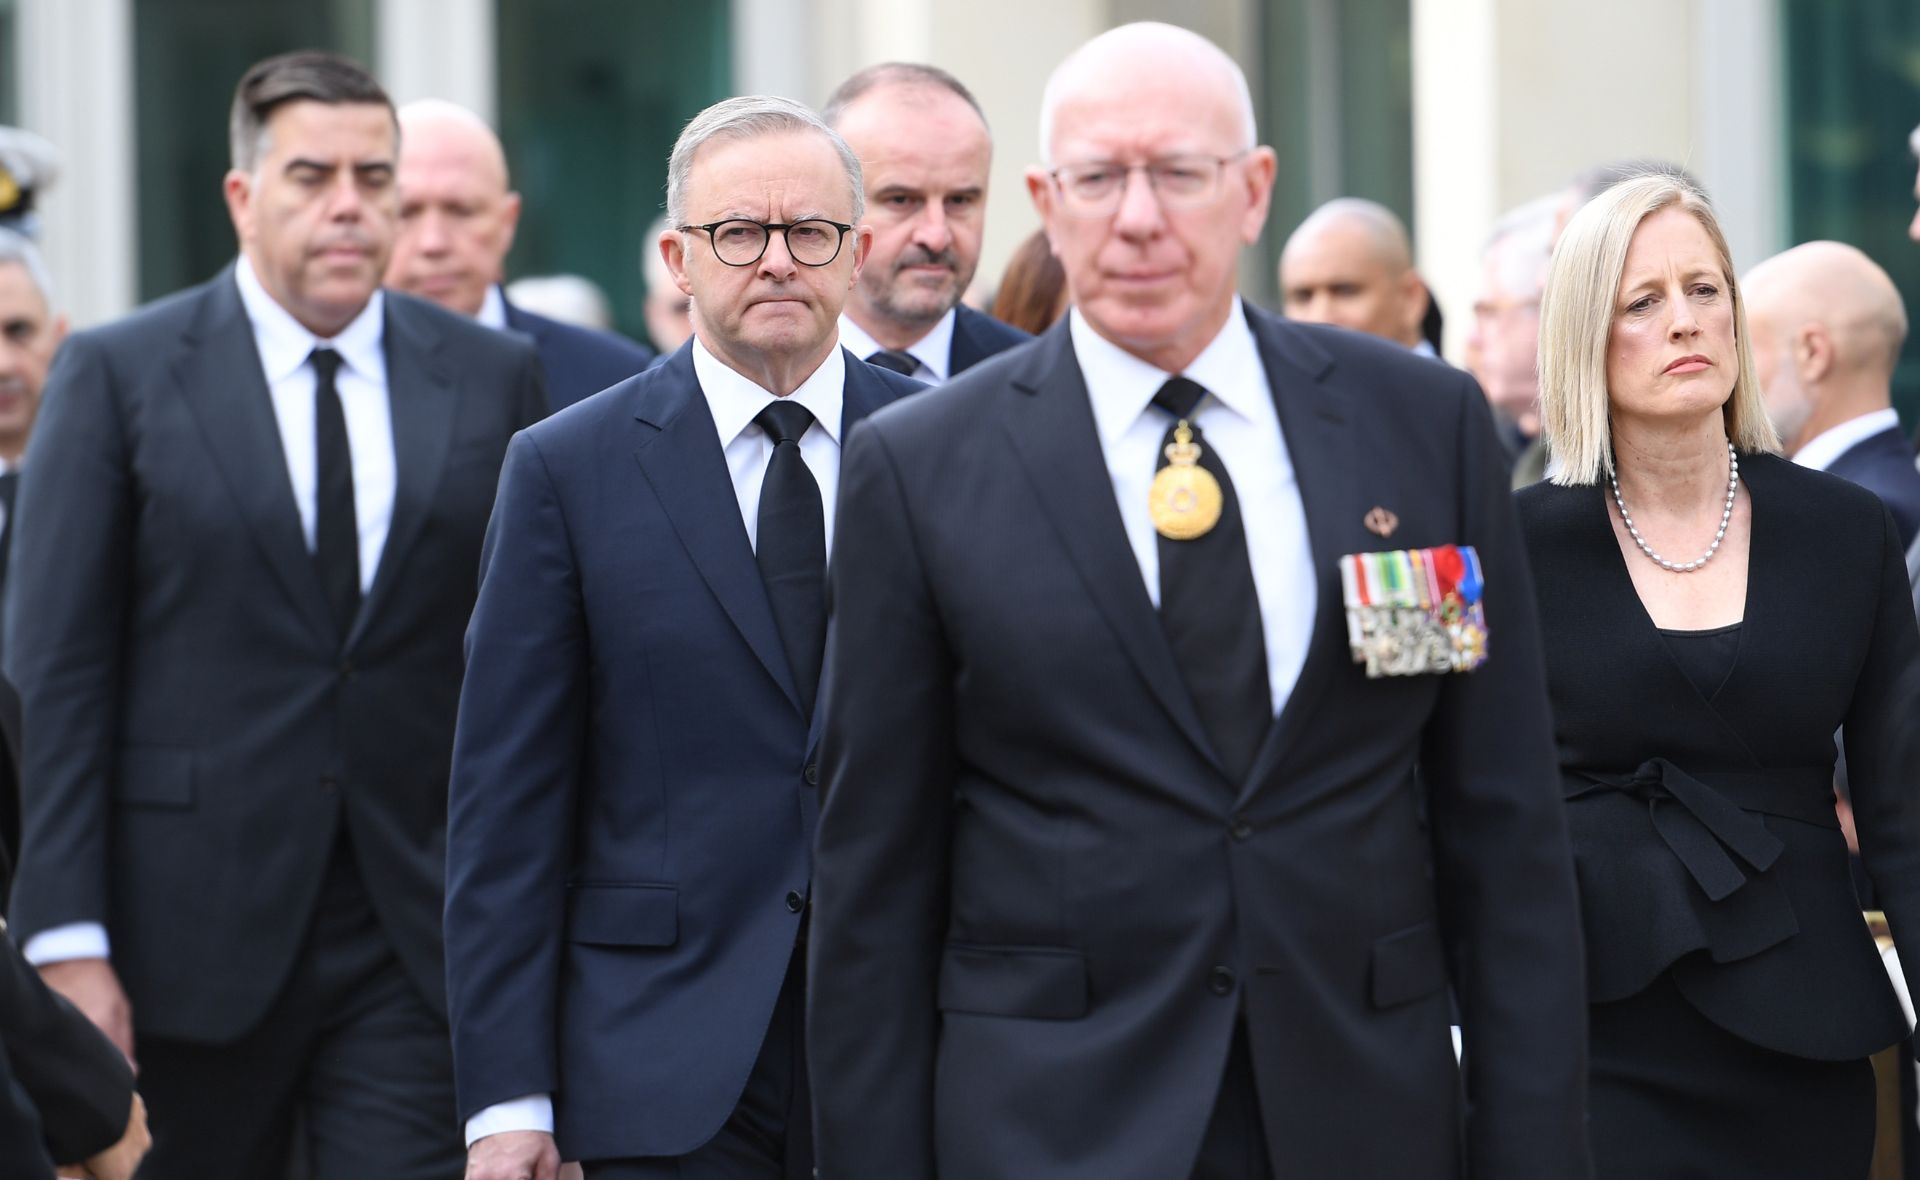 King Charles III officially proclaimed Head of State in Australia following poignant ceremony